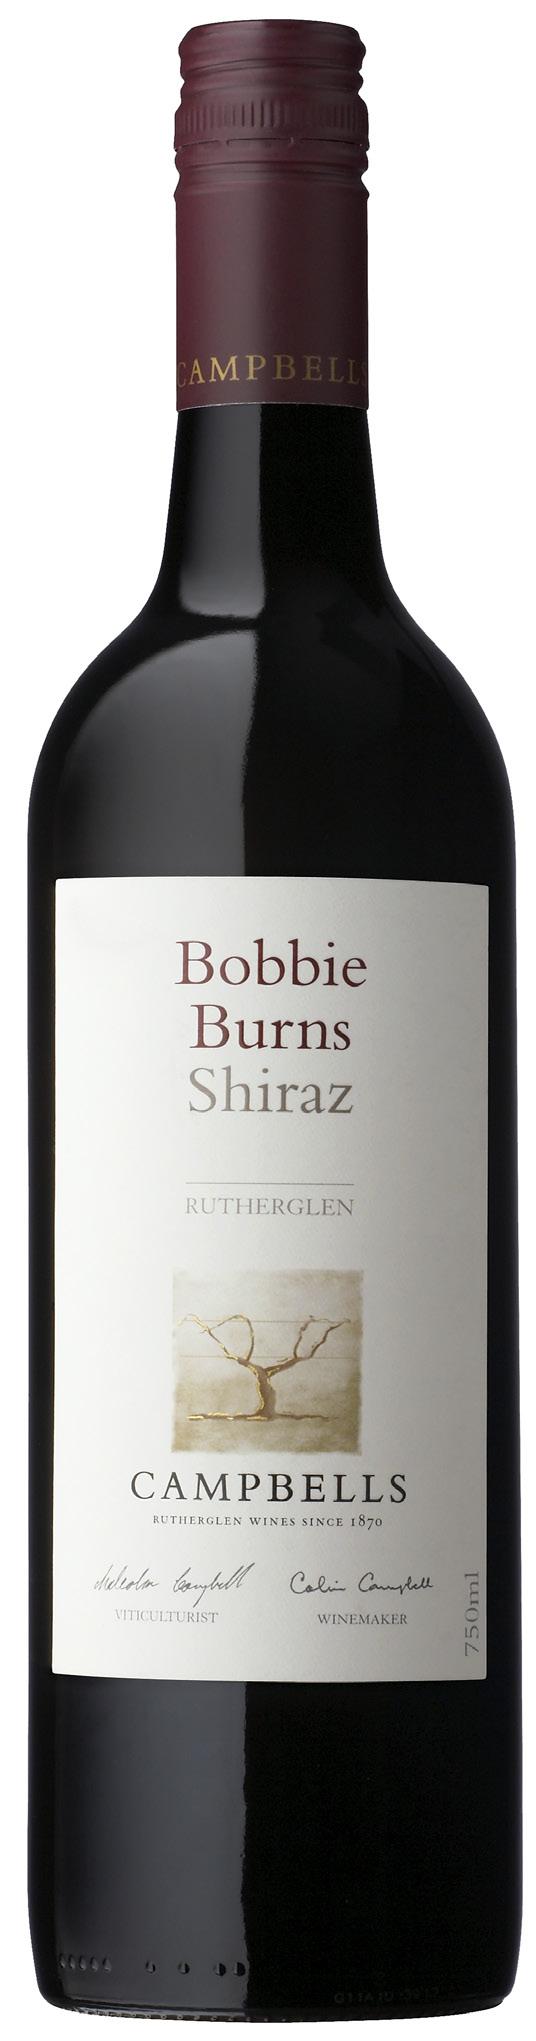 BOBBIE BURNS SHIRAZ - 2010 A Campbells and Rutherglen icon showing the true power of the Rutherglen shiraz fruit with the tannin structure for longevity.